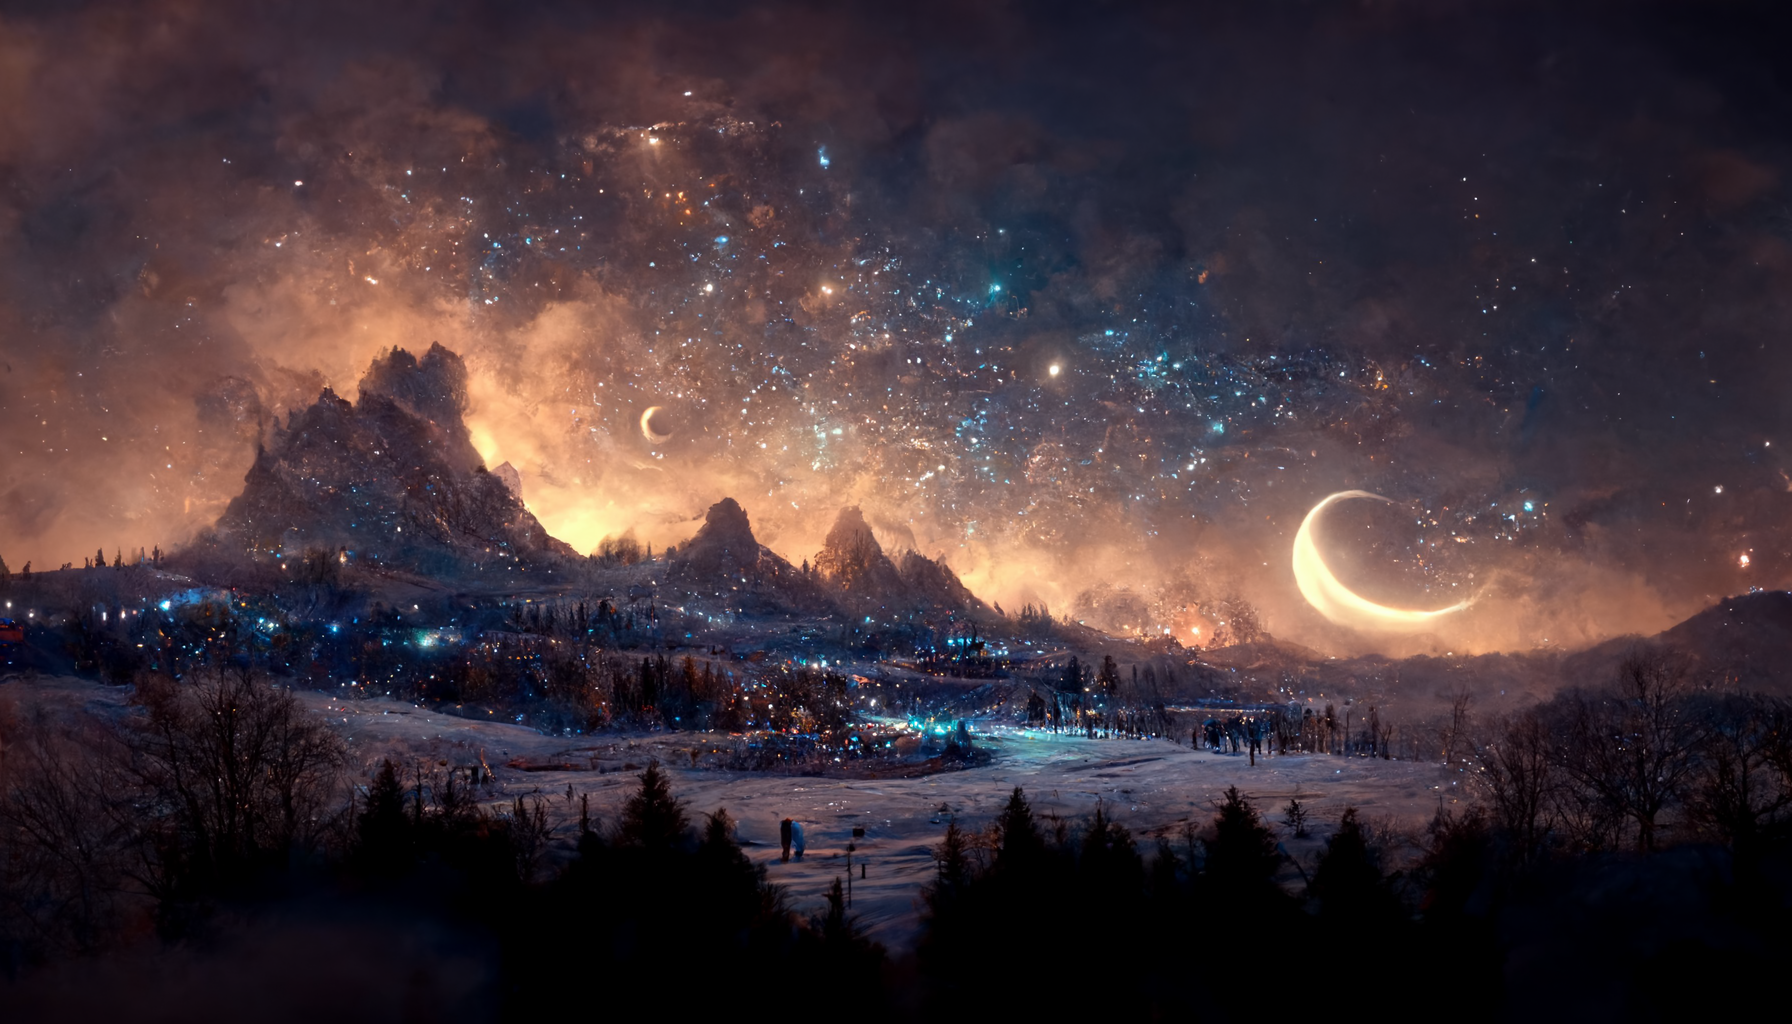 Generated with the text: `wooded mountainous winter landscape under cosmic night sky with distant glowing small town in a valley, nebulae, crescent moon, planetary rings, cinematic, atmospheric, 8k, dramatic lighting, ultra realistic` by MidjourneyAI.